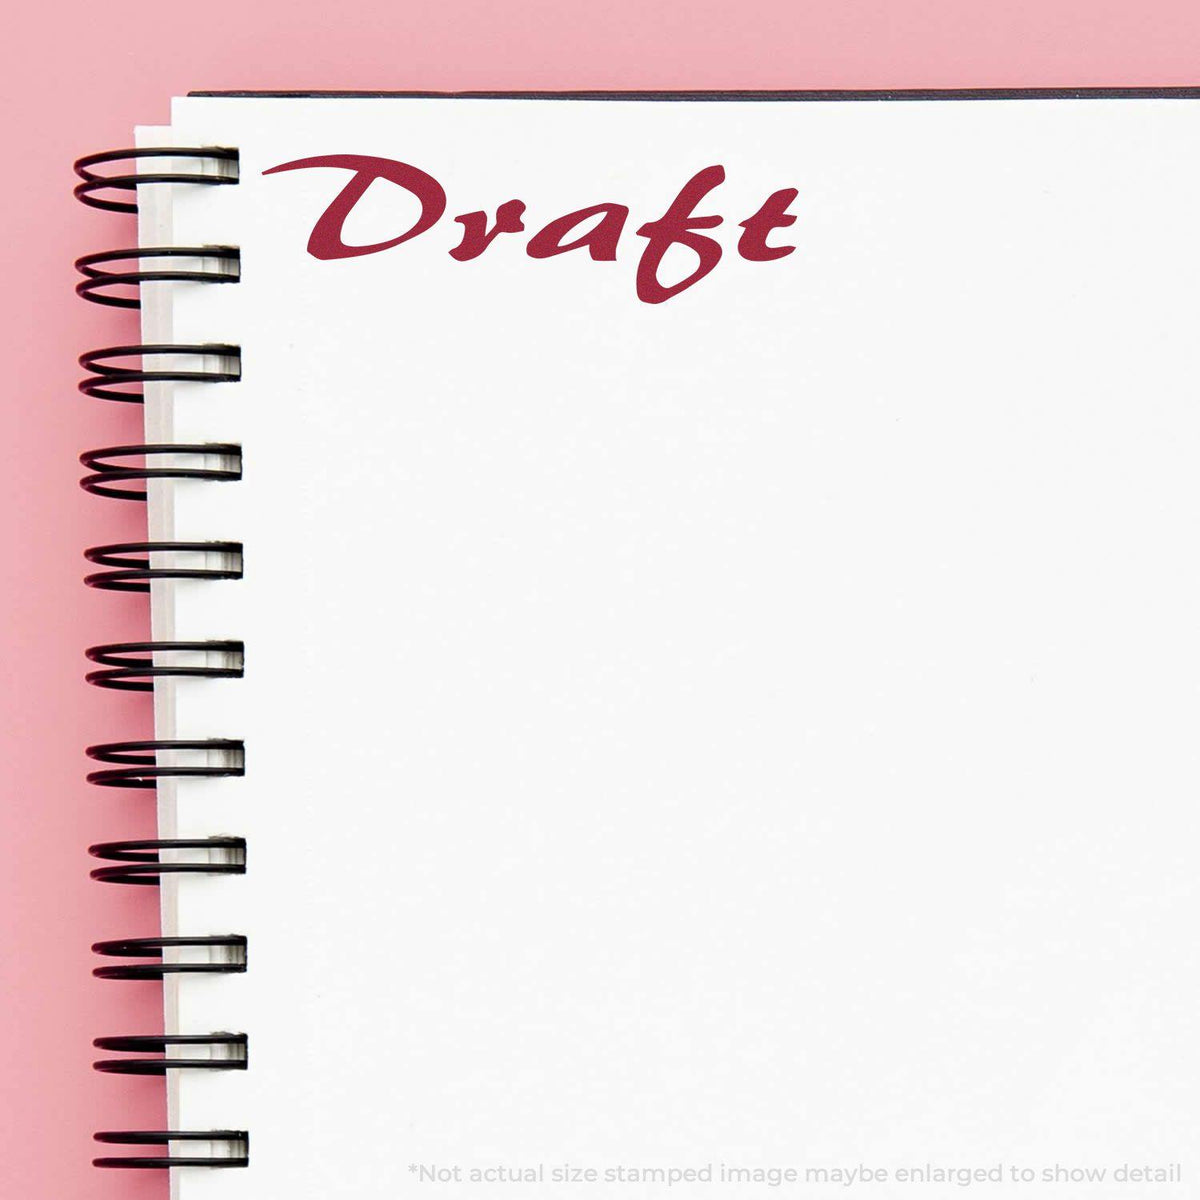 In Use Large Cursive Draft Rubber Stamp Image